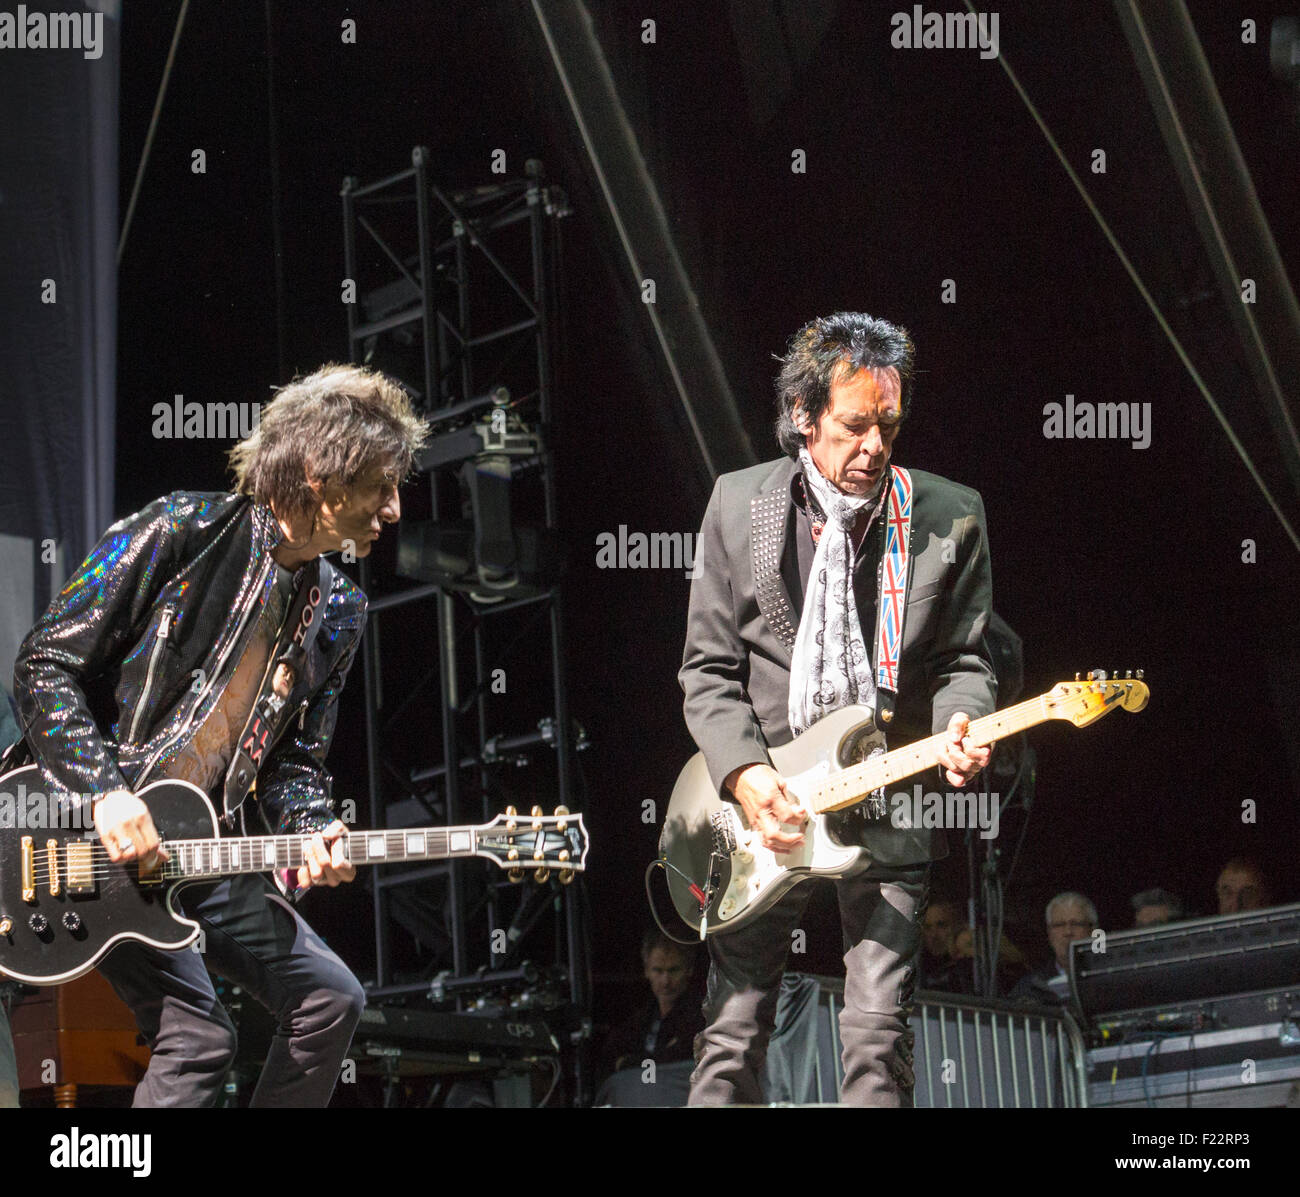 Pop stars Ronnie Wood and Robin le Mesurier jamming, playing guitar with The Faces reunited, performing in concert live on stage, Sept 2015 Stock Photo